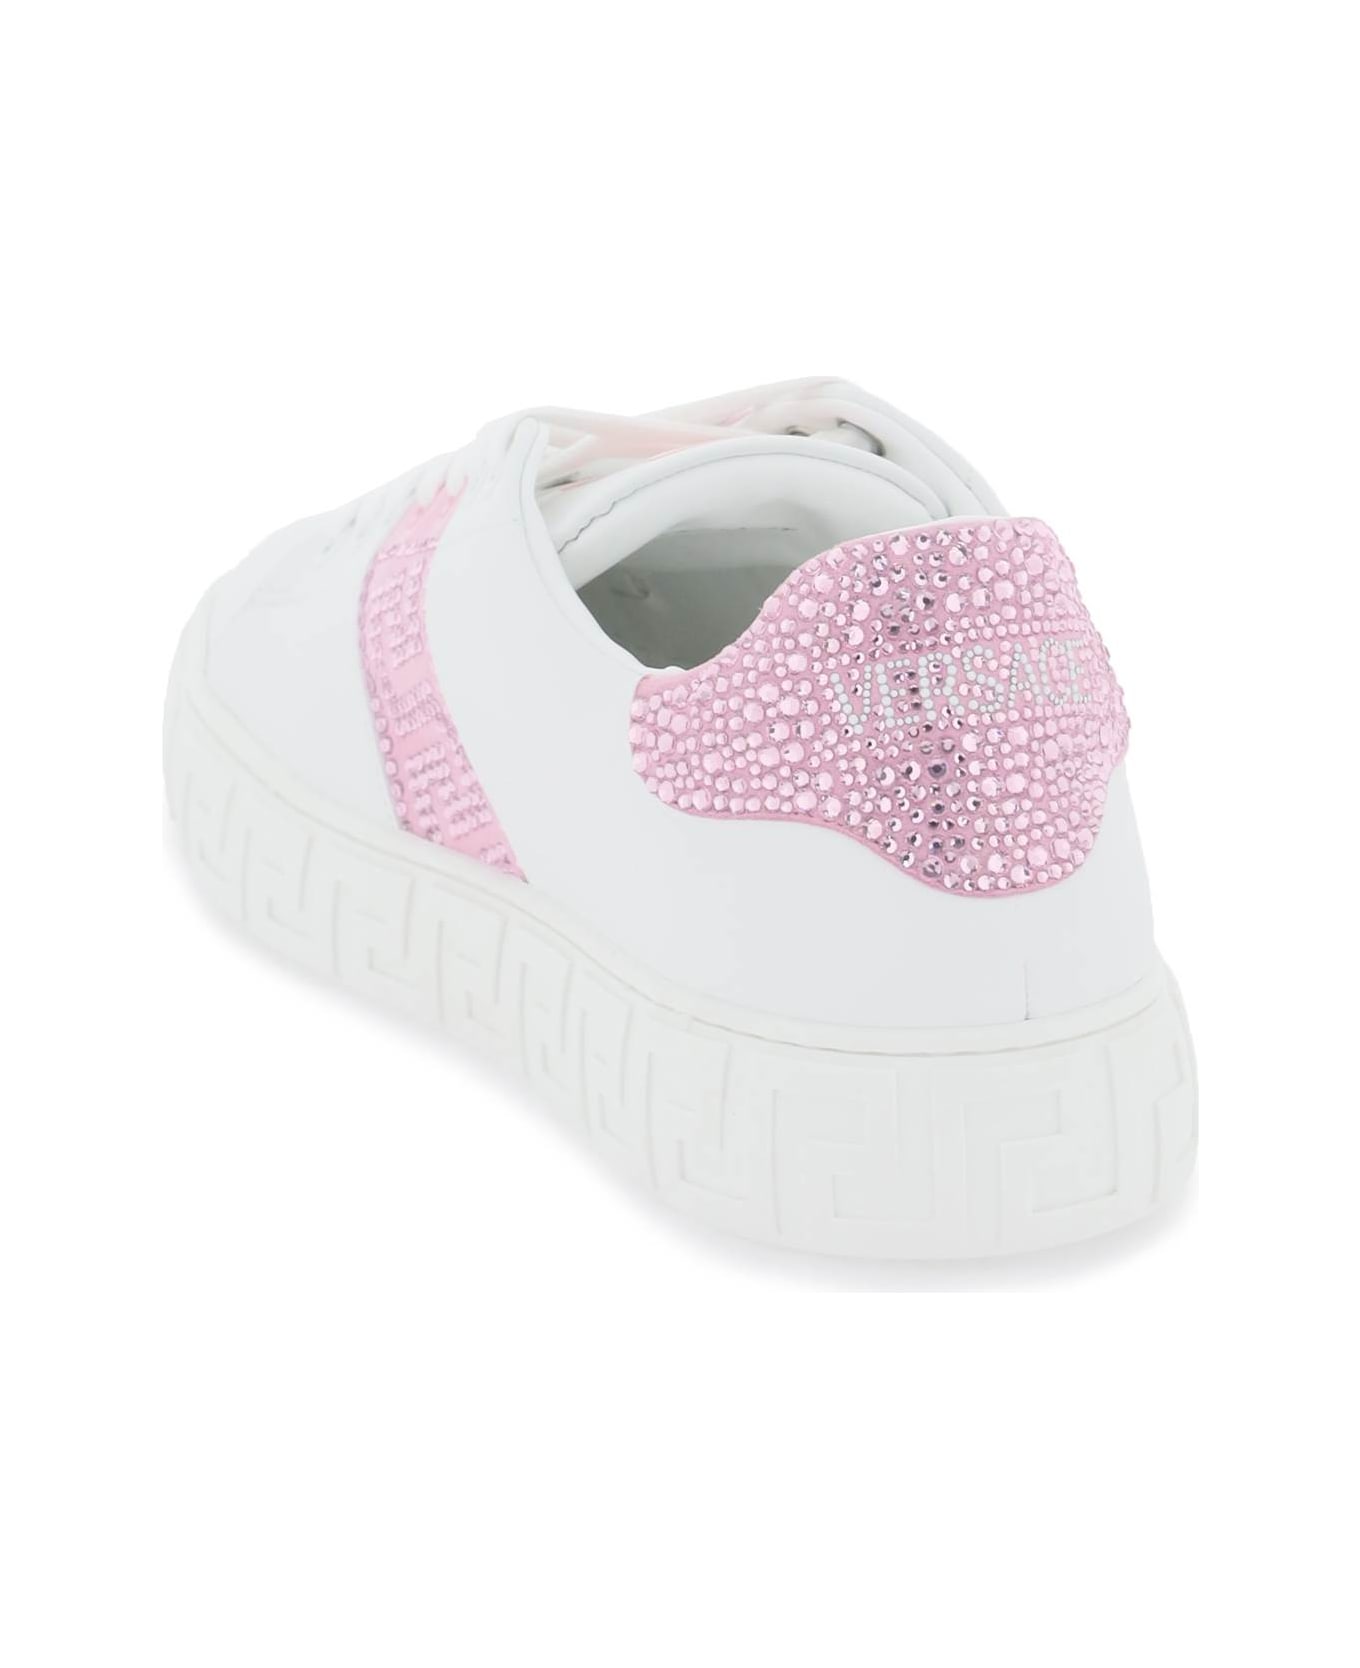 Versace Crystal Greca Sneakers - WHITE PALE PINK (White)